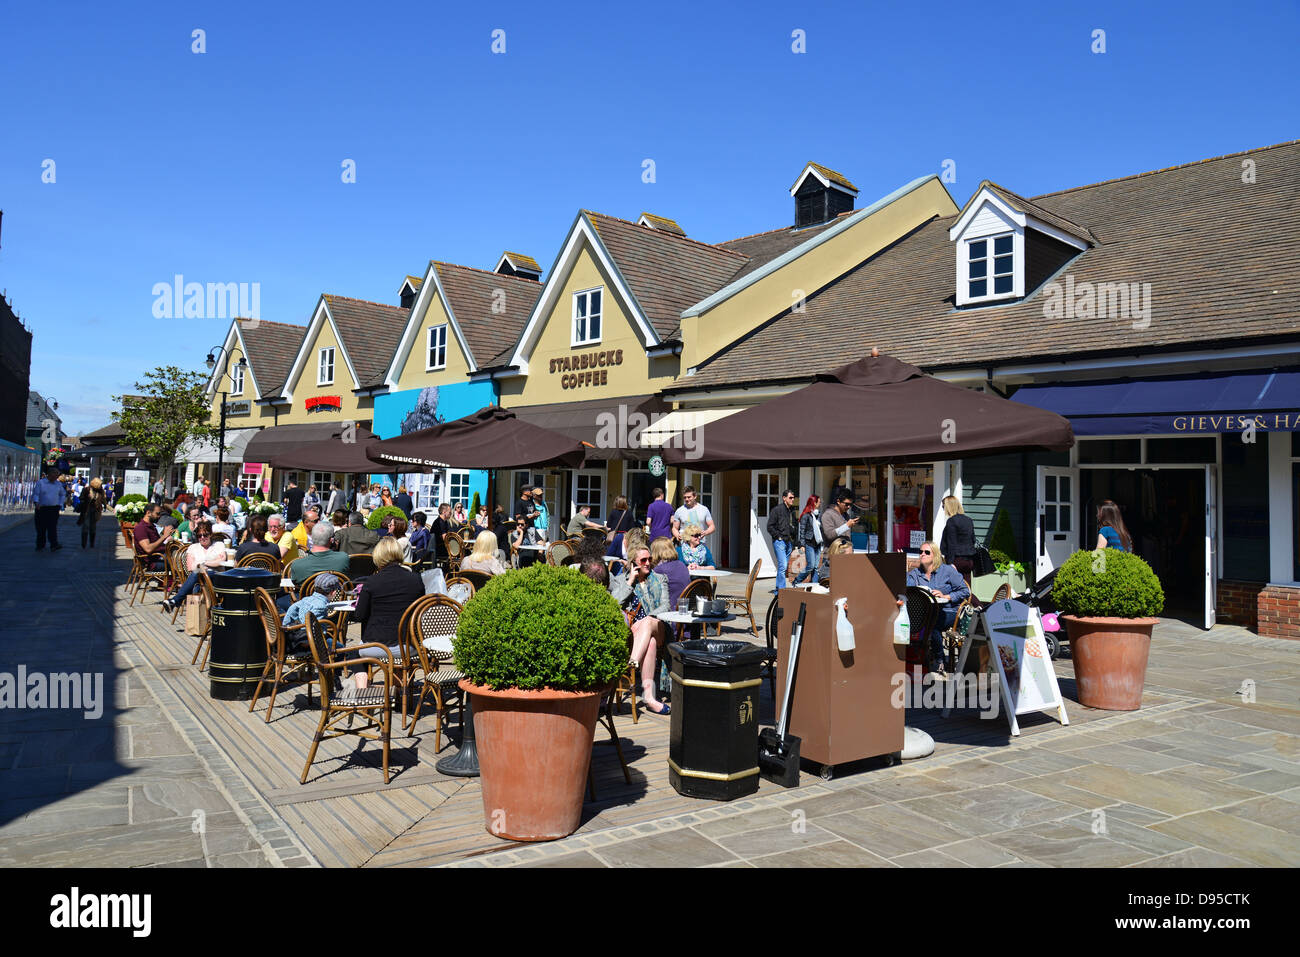 Starbucks Coffee shop, Bicester Village Outlet Shopping Centre, Bicester, Oxfordshire, England, United Kingdom Stock Photo